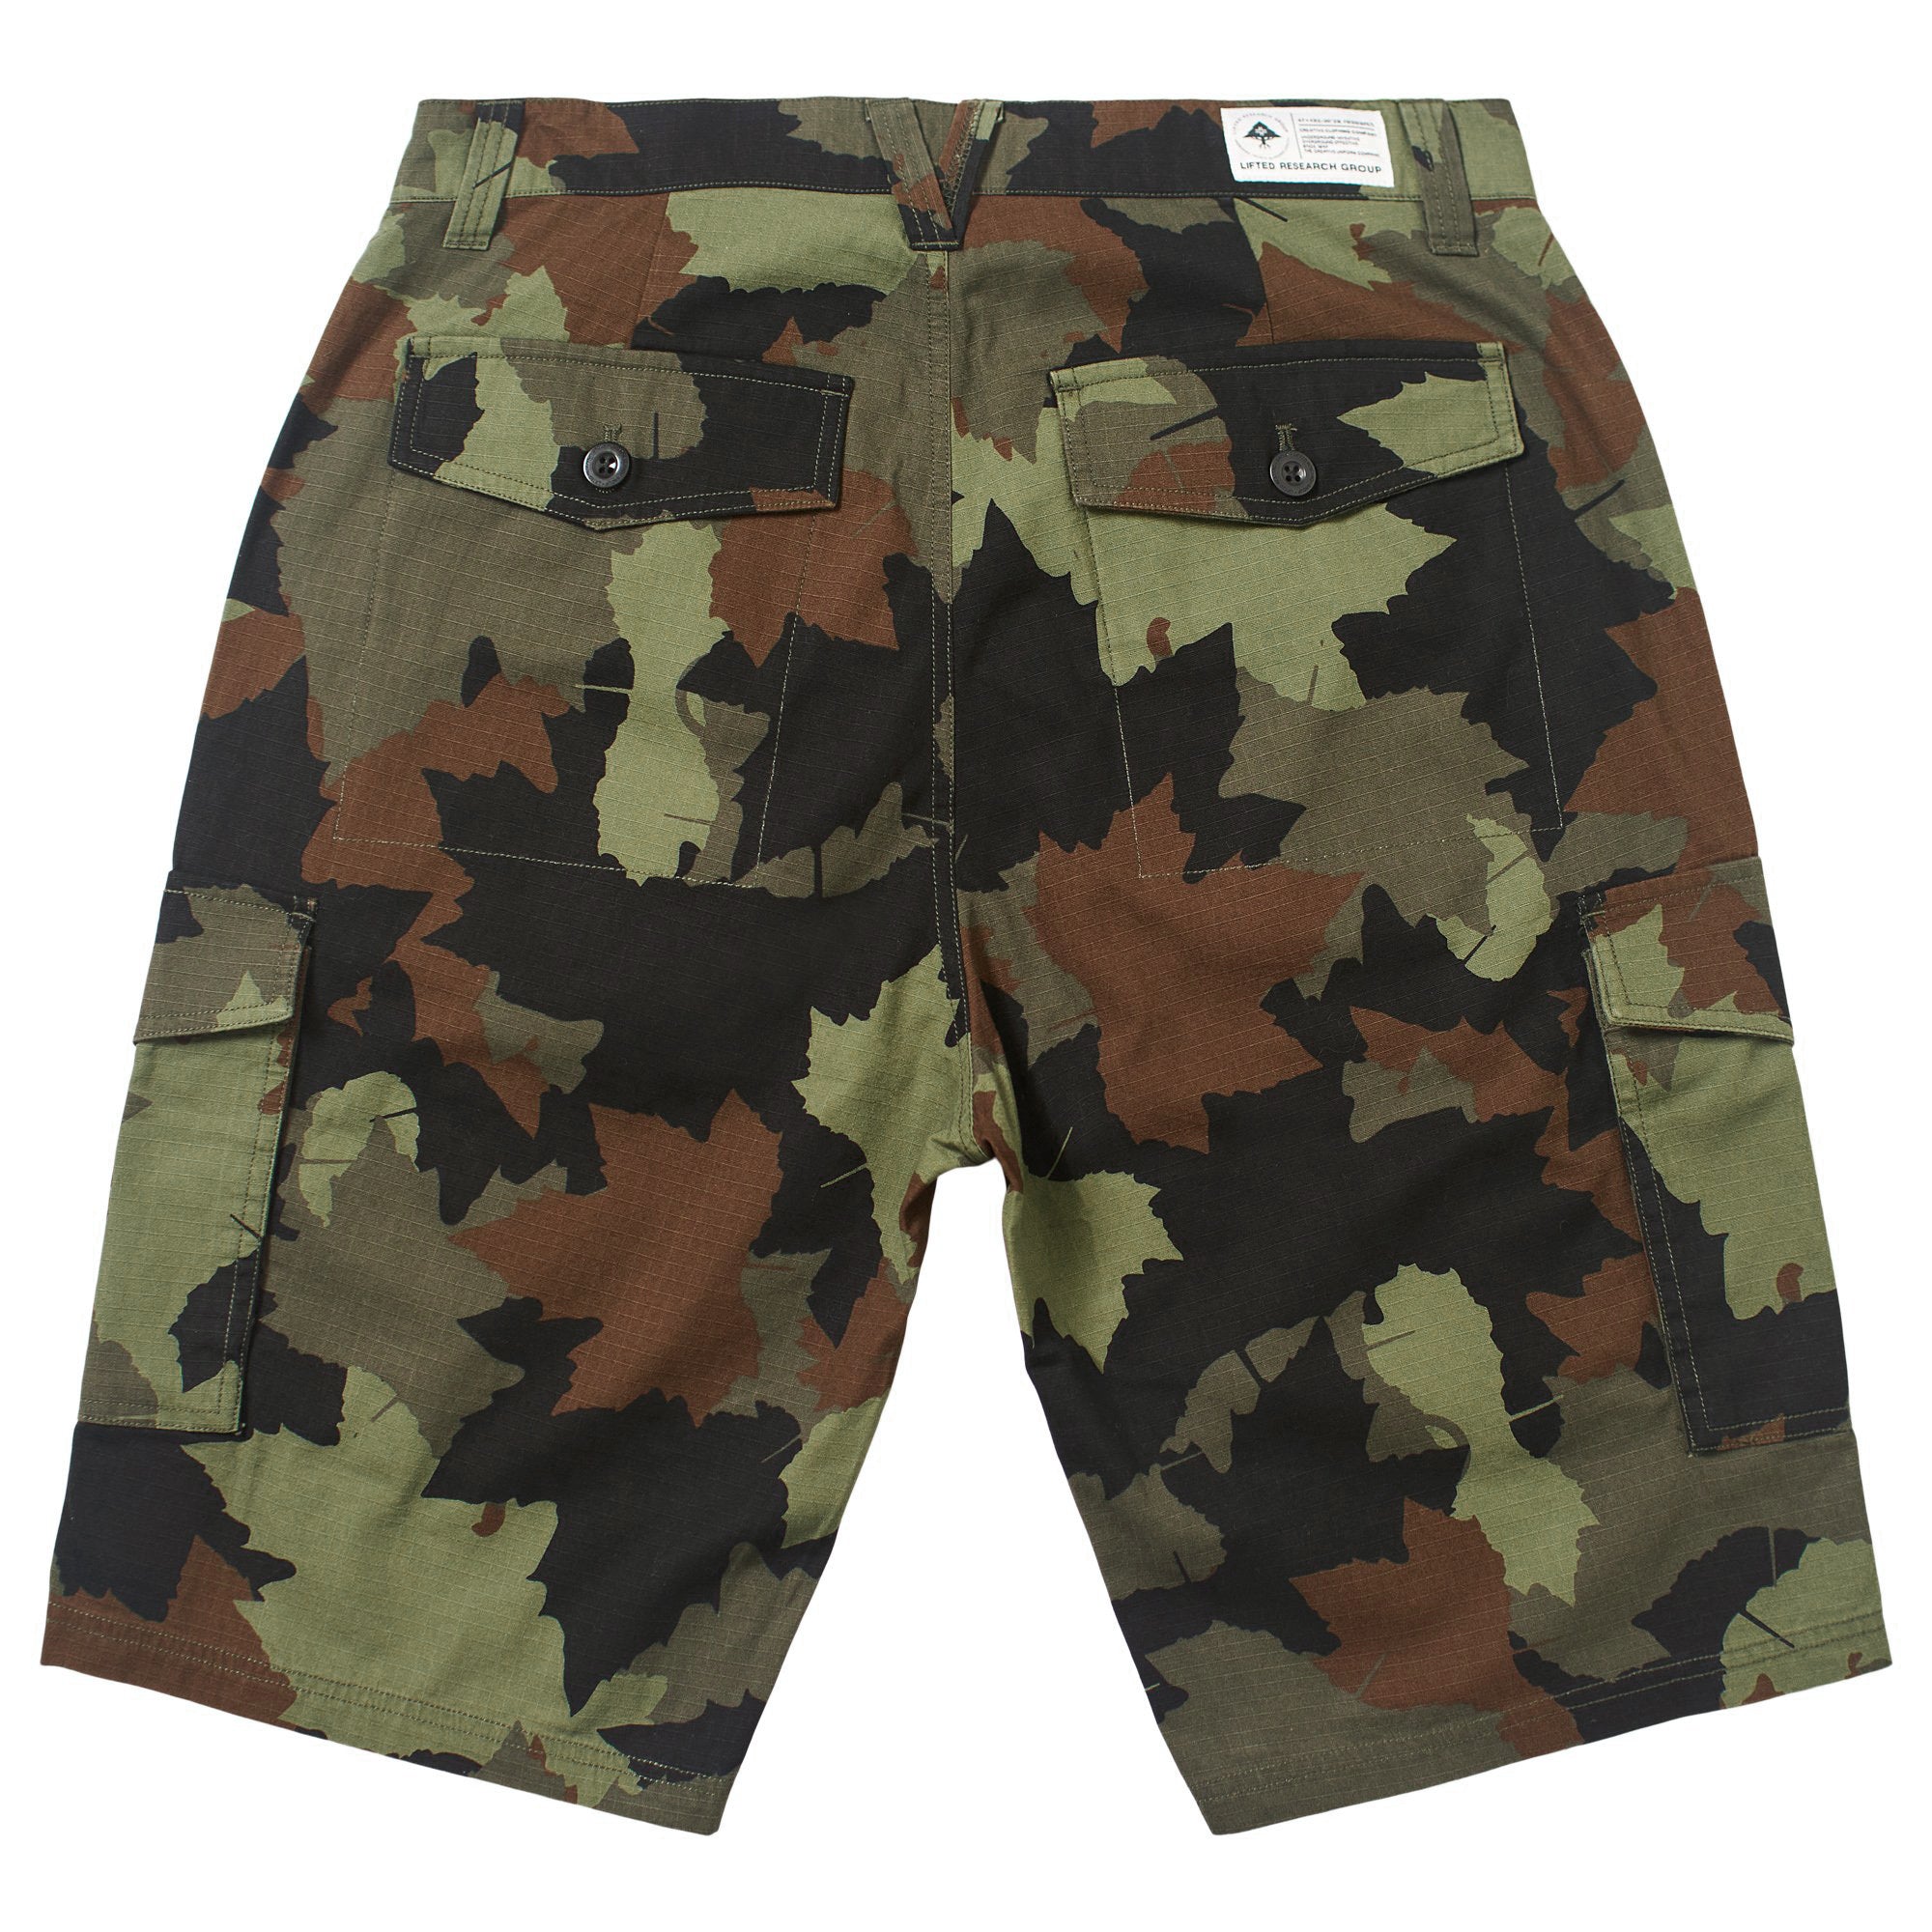 Bering Strait Removal It's lucky that LRG RC RipstopCargoShort Camouflage | LRG Clothing